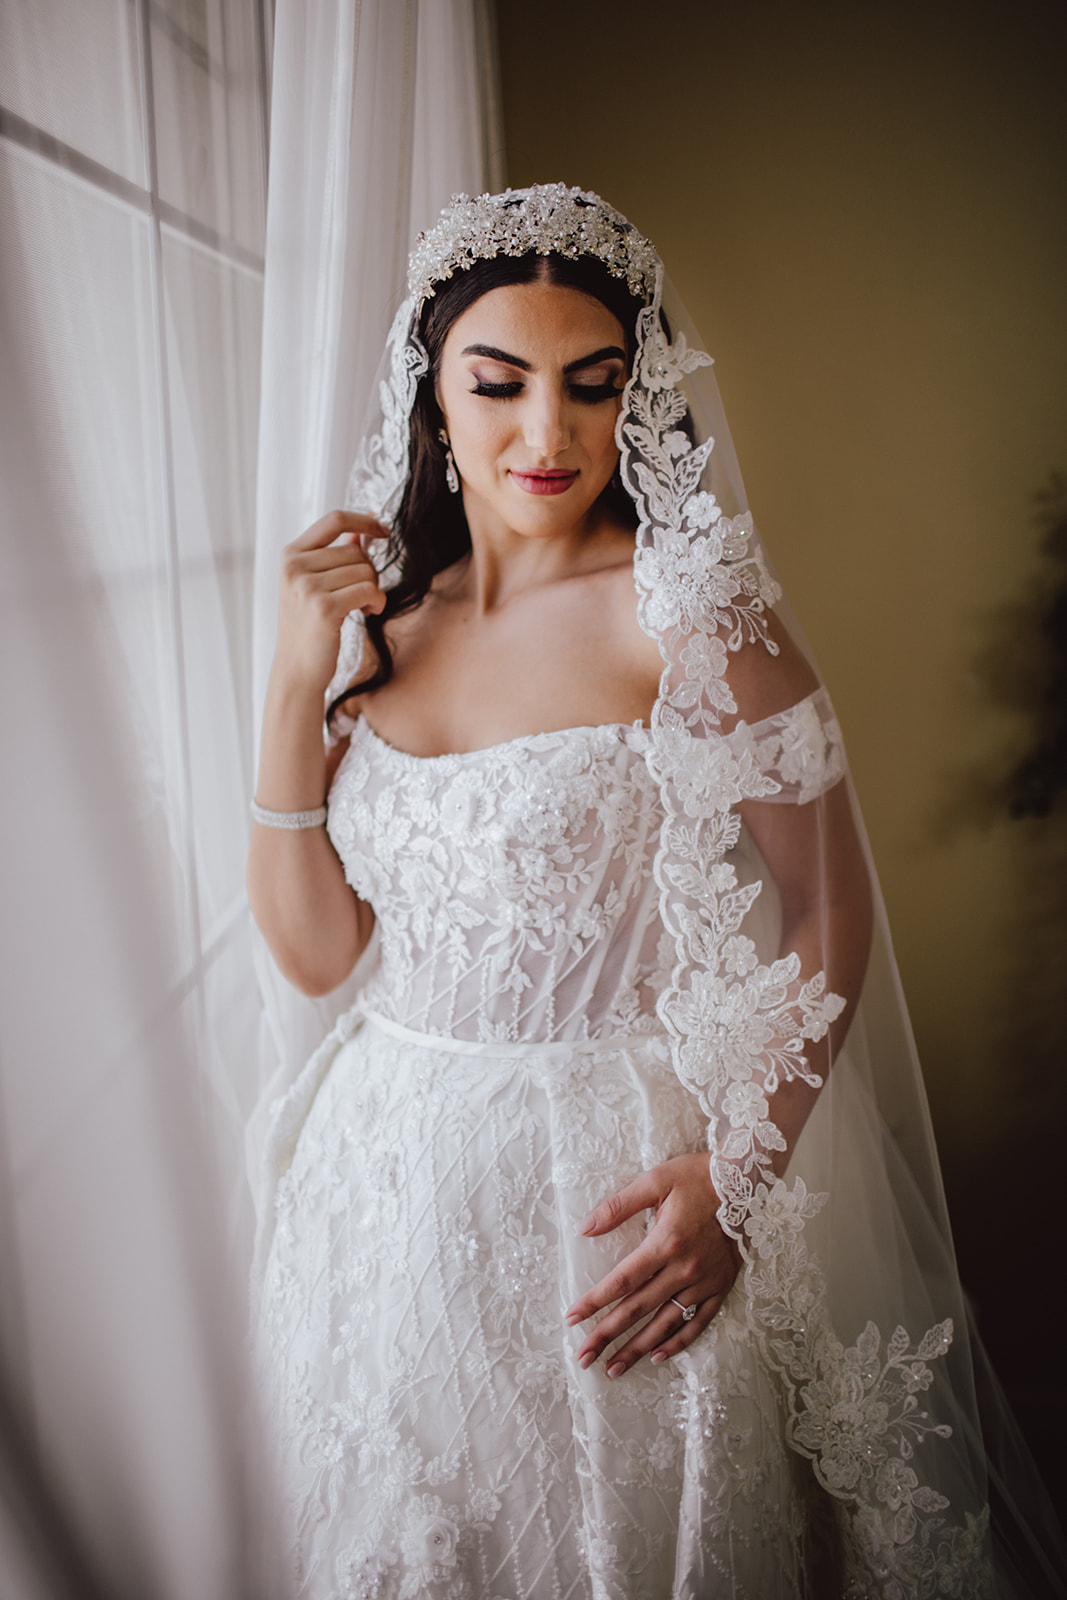 Bride with Detailed Lace Veil for Fairytale Revere Country Club Wedding